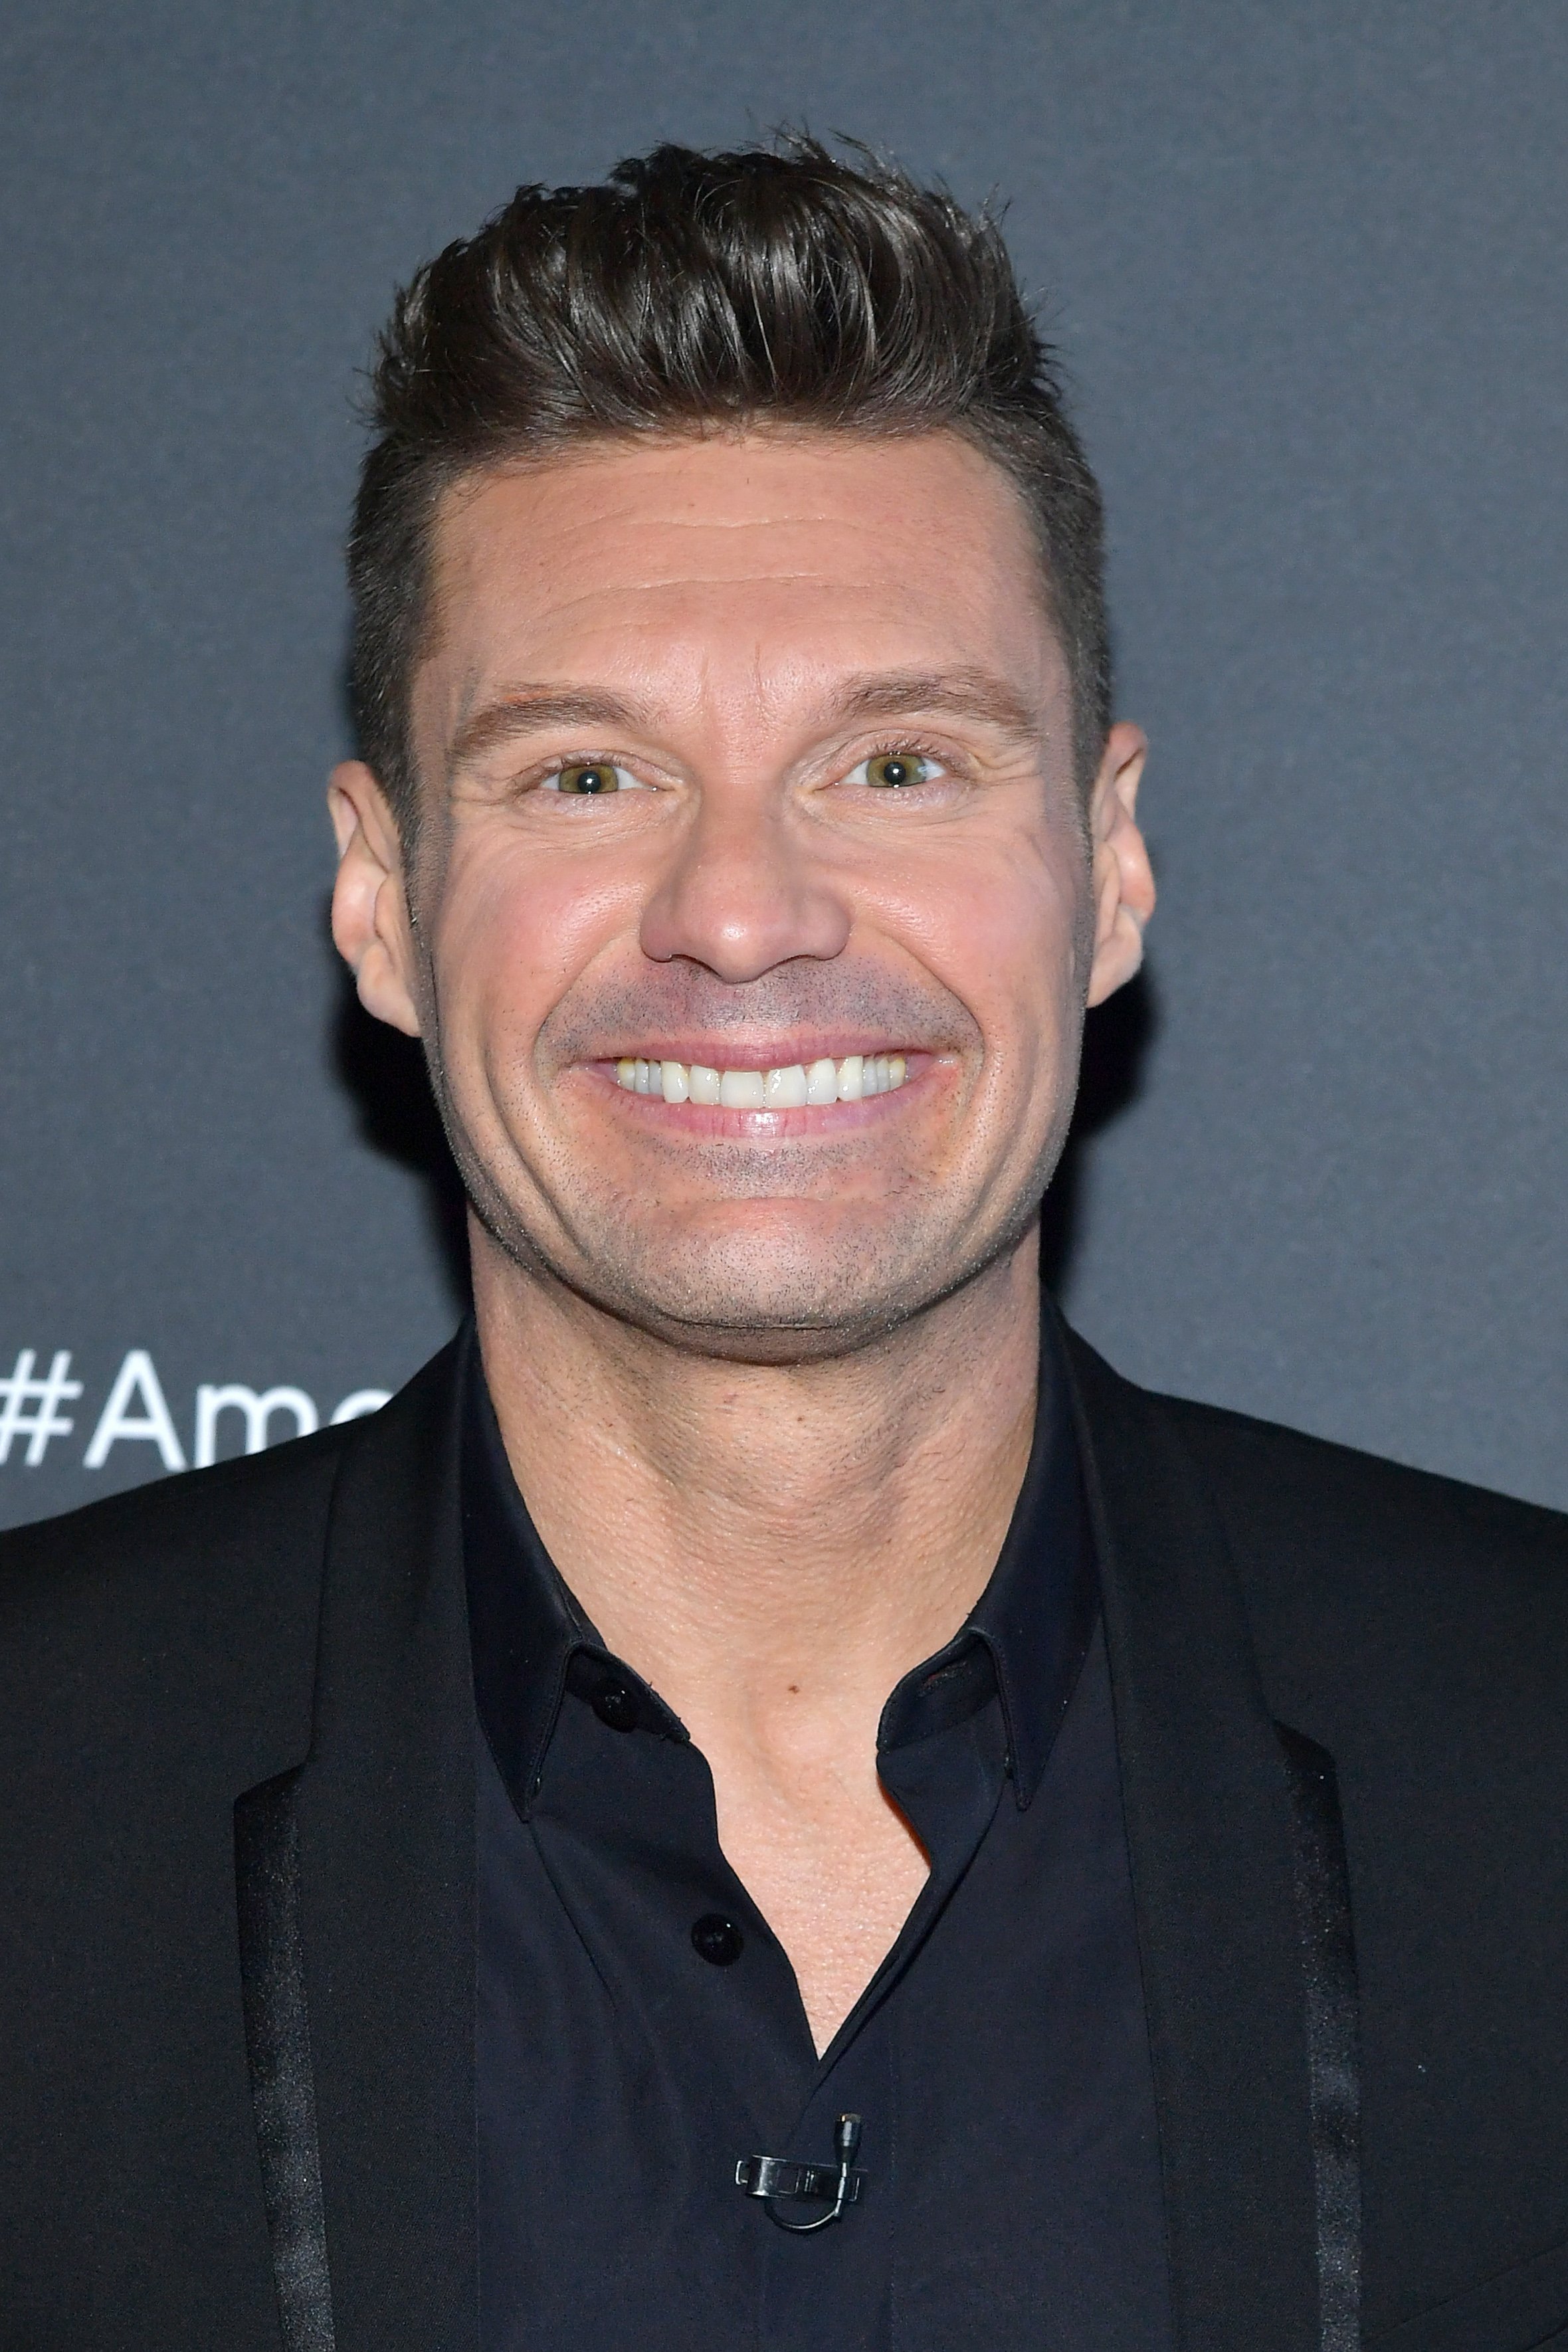 Ryan Seacrest at ABC's American Idol live show on May 12, 2019 in Los Angeles, California | Photo: Getty Images